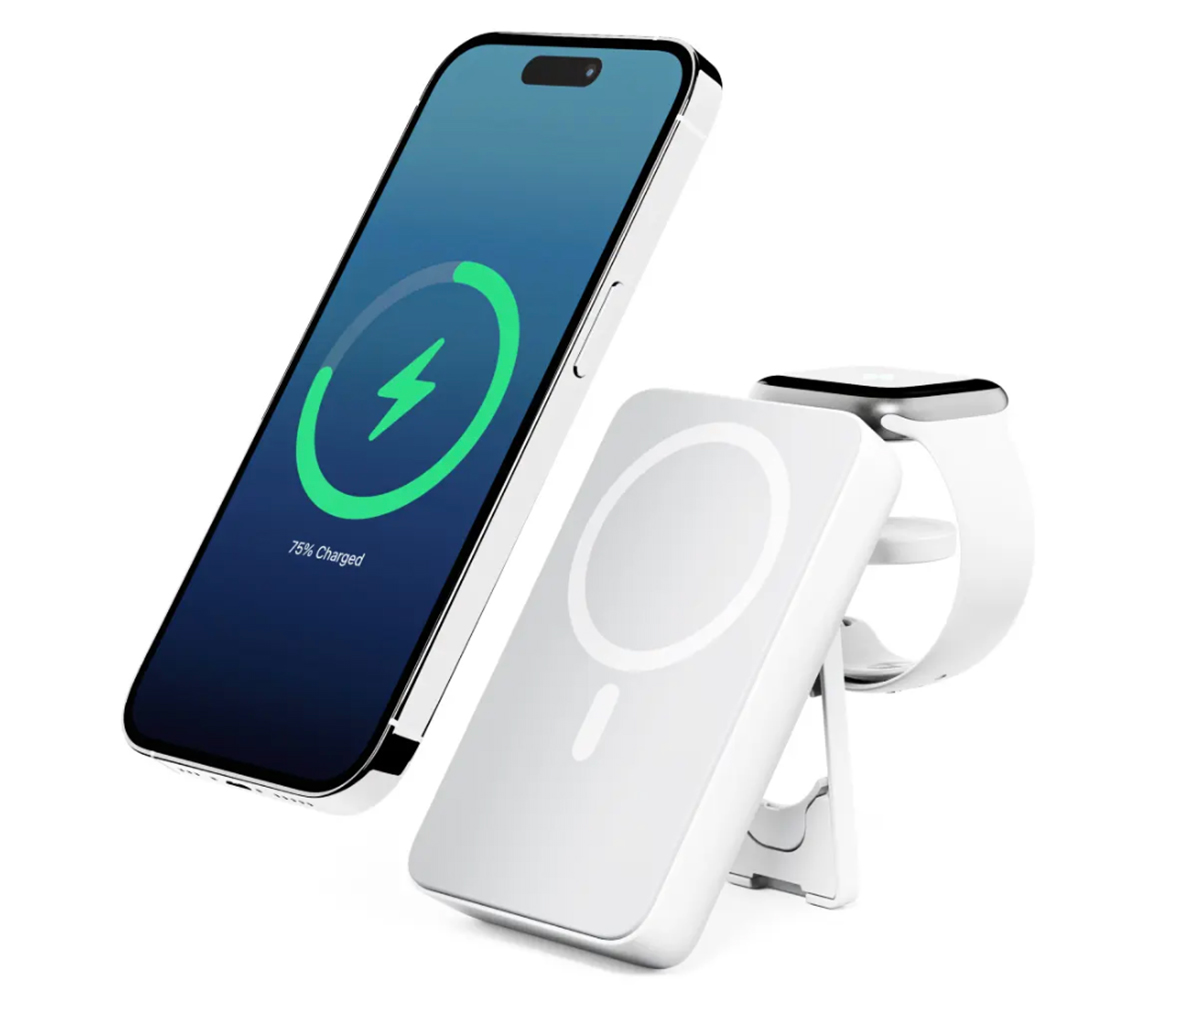 Alogic Lift 4-in-1 MagSafe Wireless 10000mAh Power Bank – Best 2-in-1 Apple Watch power bank stand